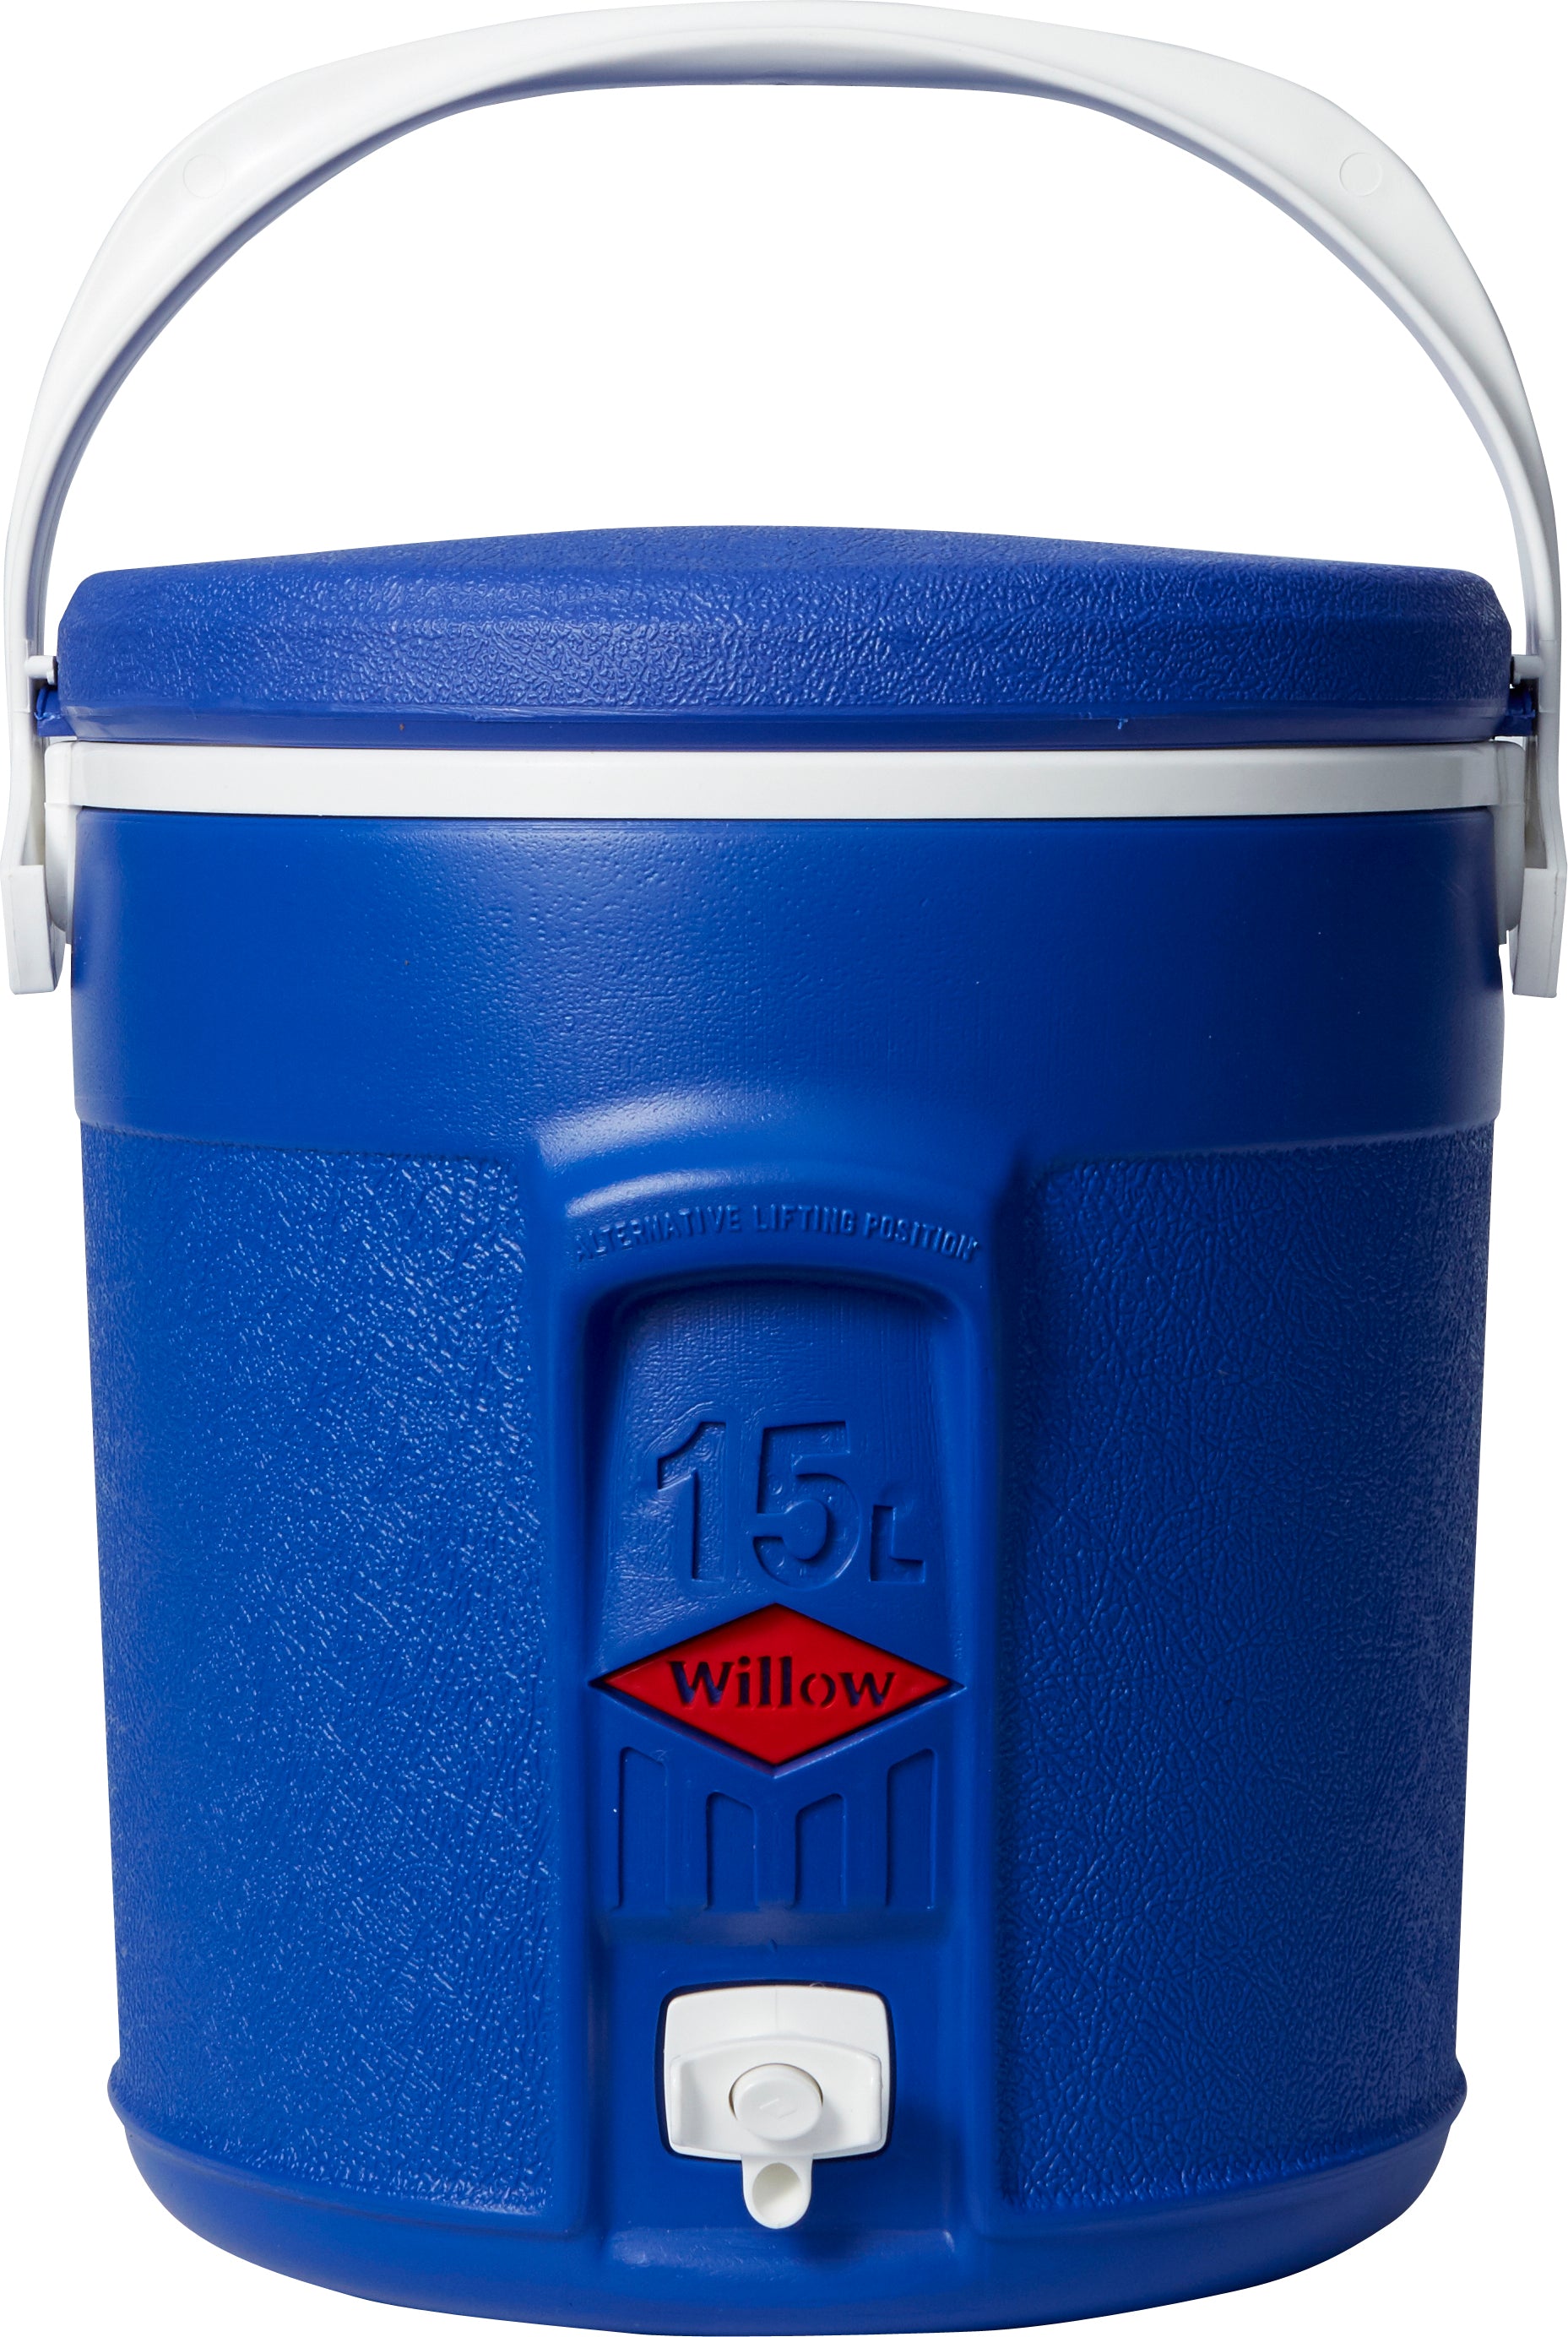 Willow XL Cooler Jug with Tap